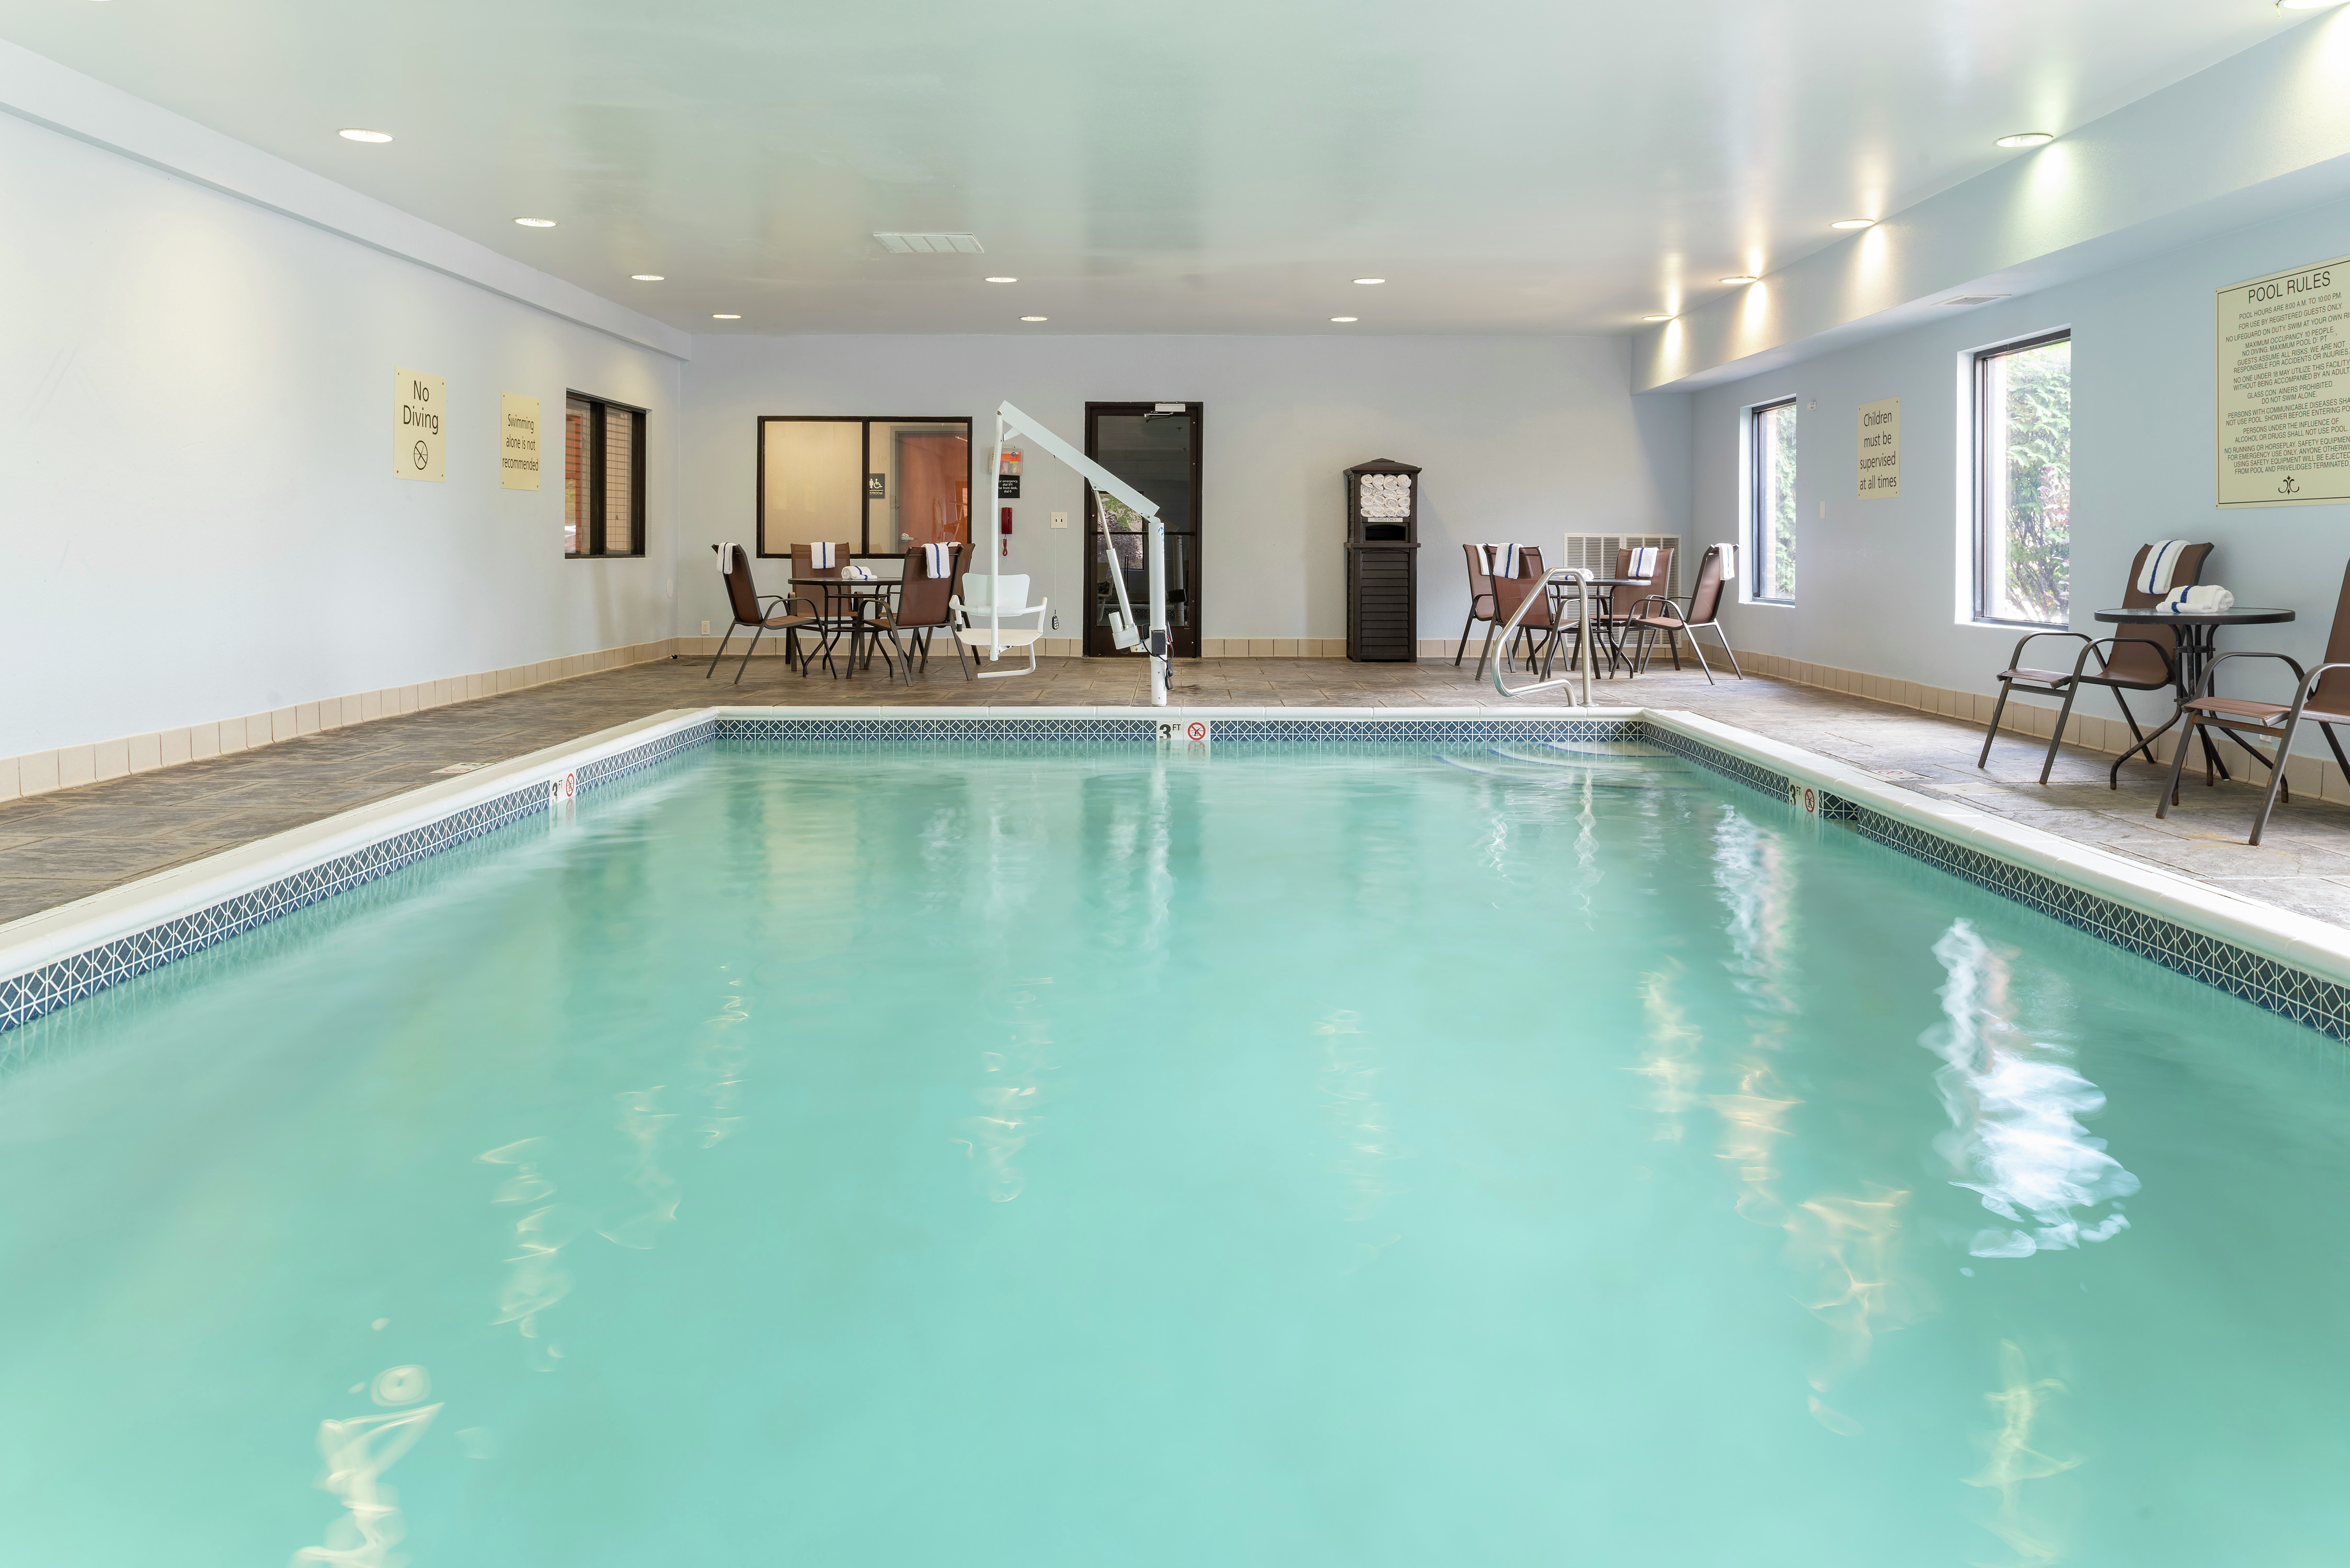 Indoor Pool Area with Tables and Chairs